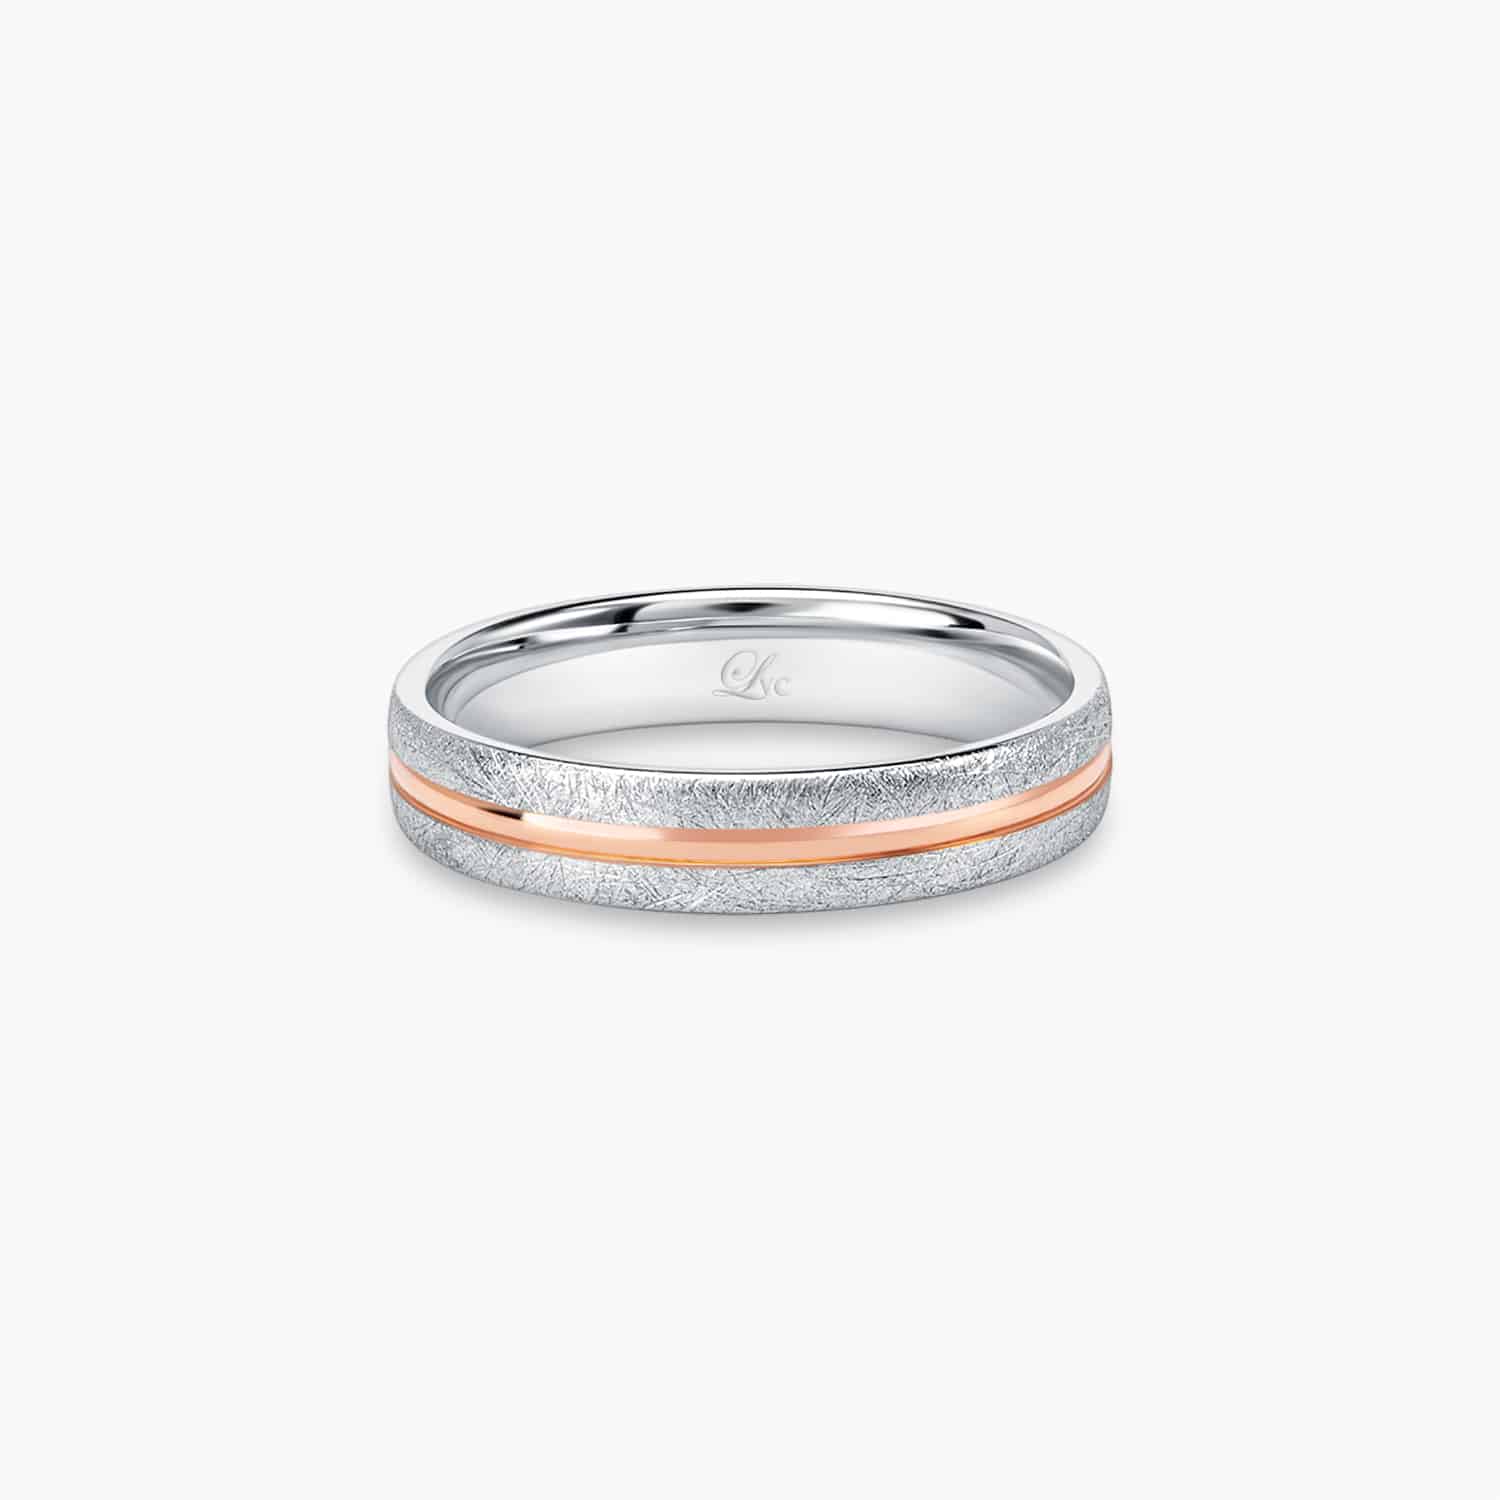 LVC SOLEIL WEDDING BAND IN MATTE AND GLOSSY FINISH a wedding band for men in white and rose gold